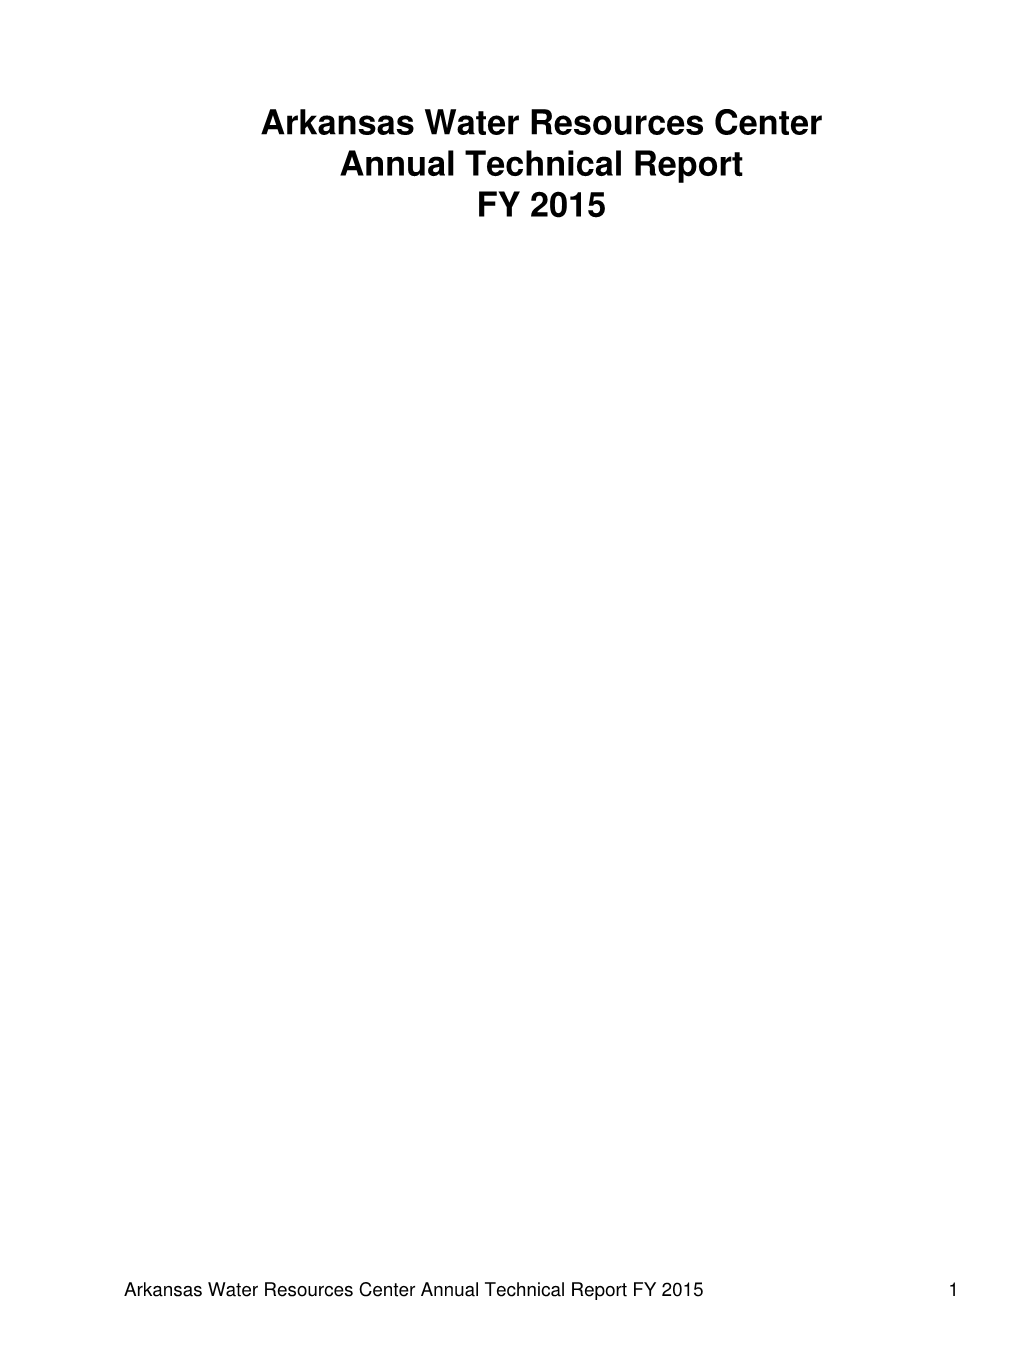 Arkansas Water Resources Center Annual Technical Report FY 2015